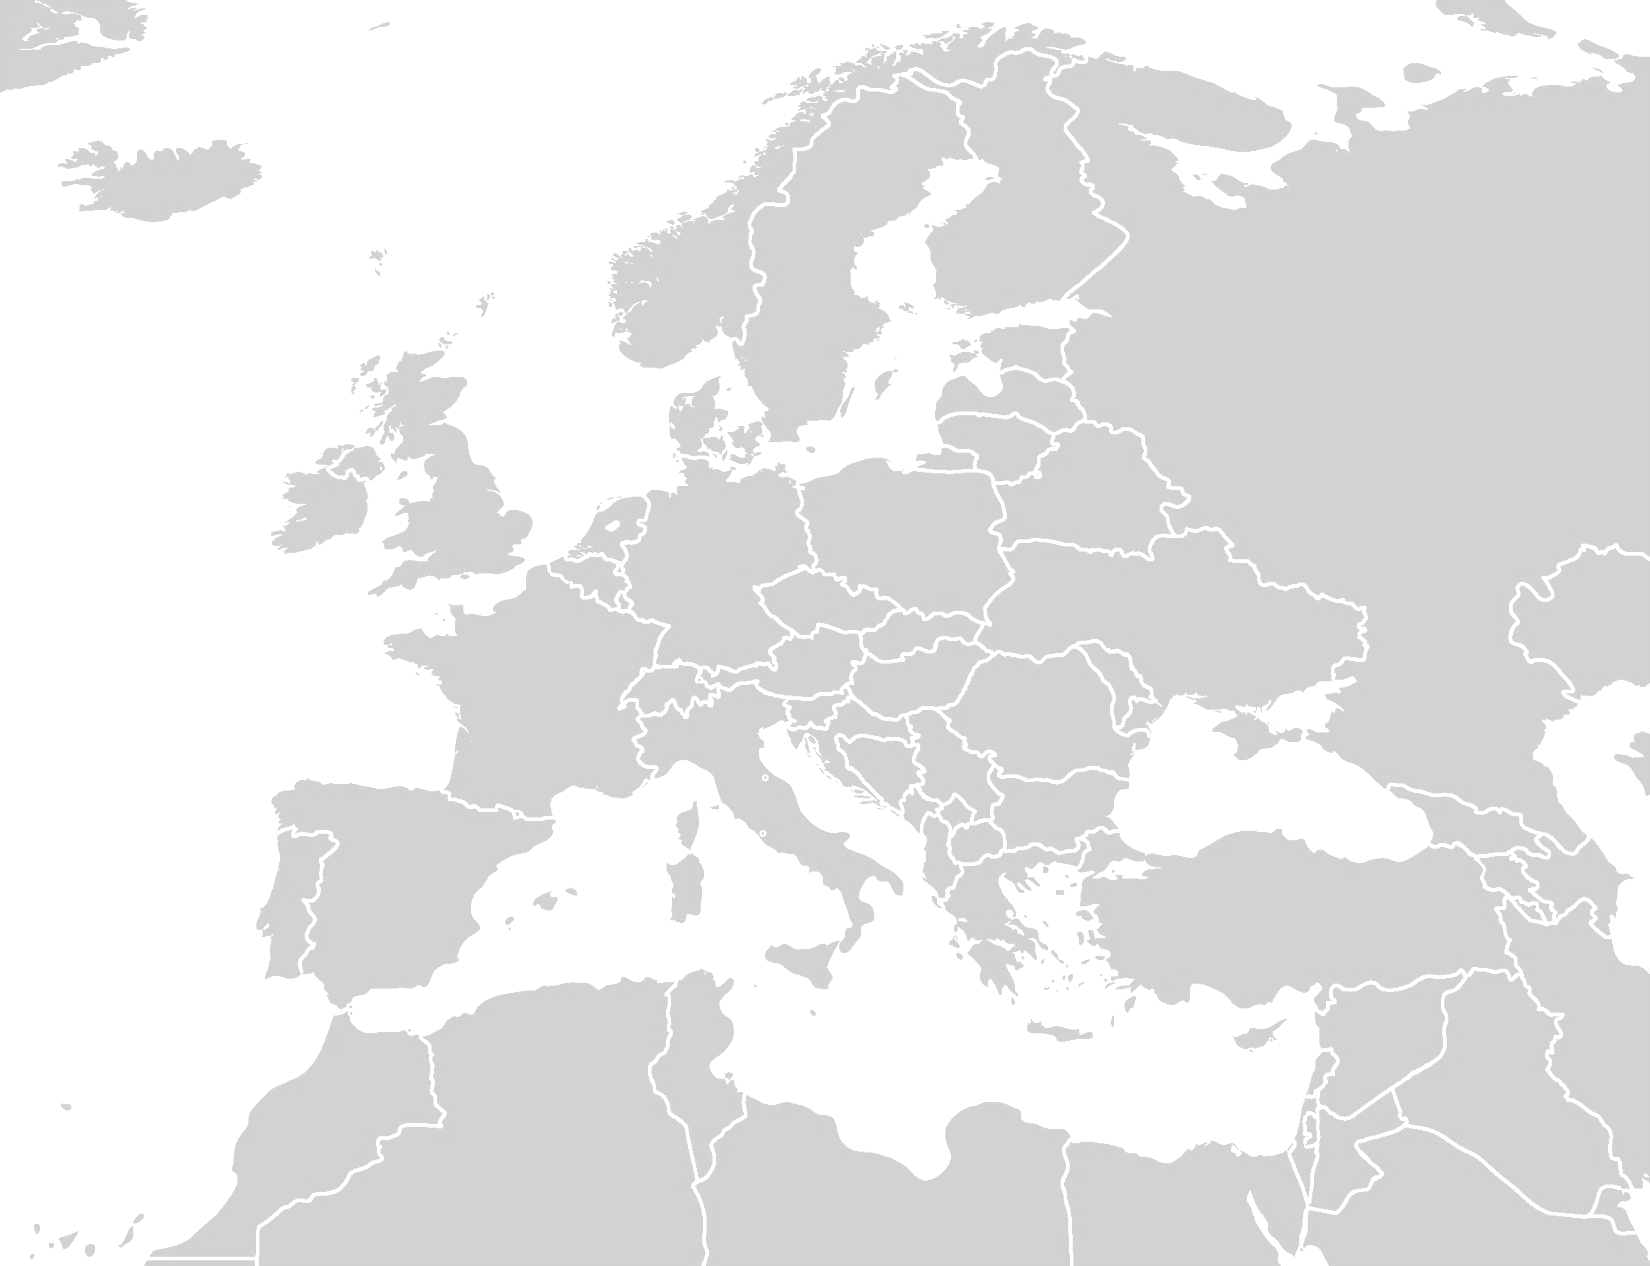 http://upload.wikimedia.org/wikipedia/commons/5/5a/blankmap-europe-v4.png